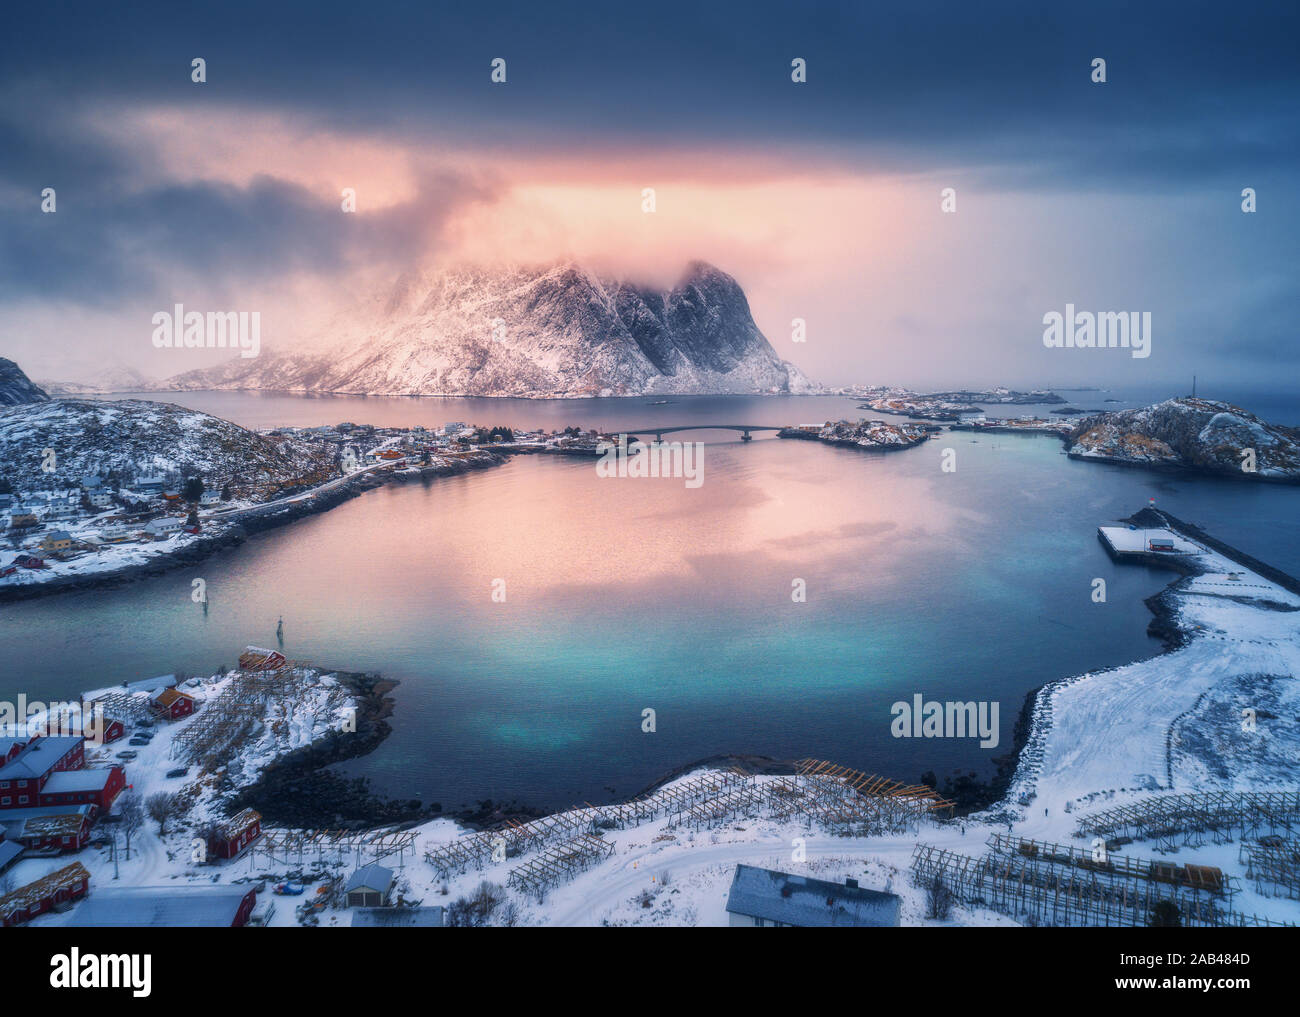 Aerial view of snowy mountain, village on sea coast, colorful sky Stock Photo